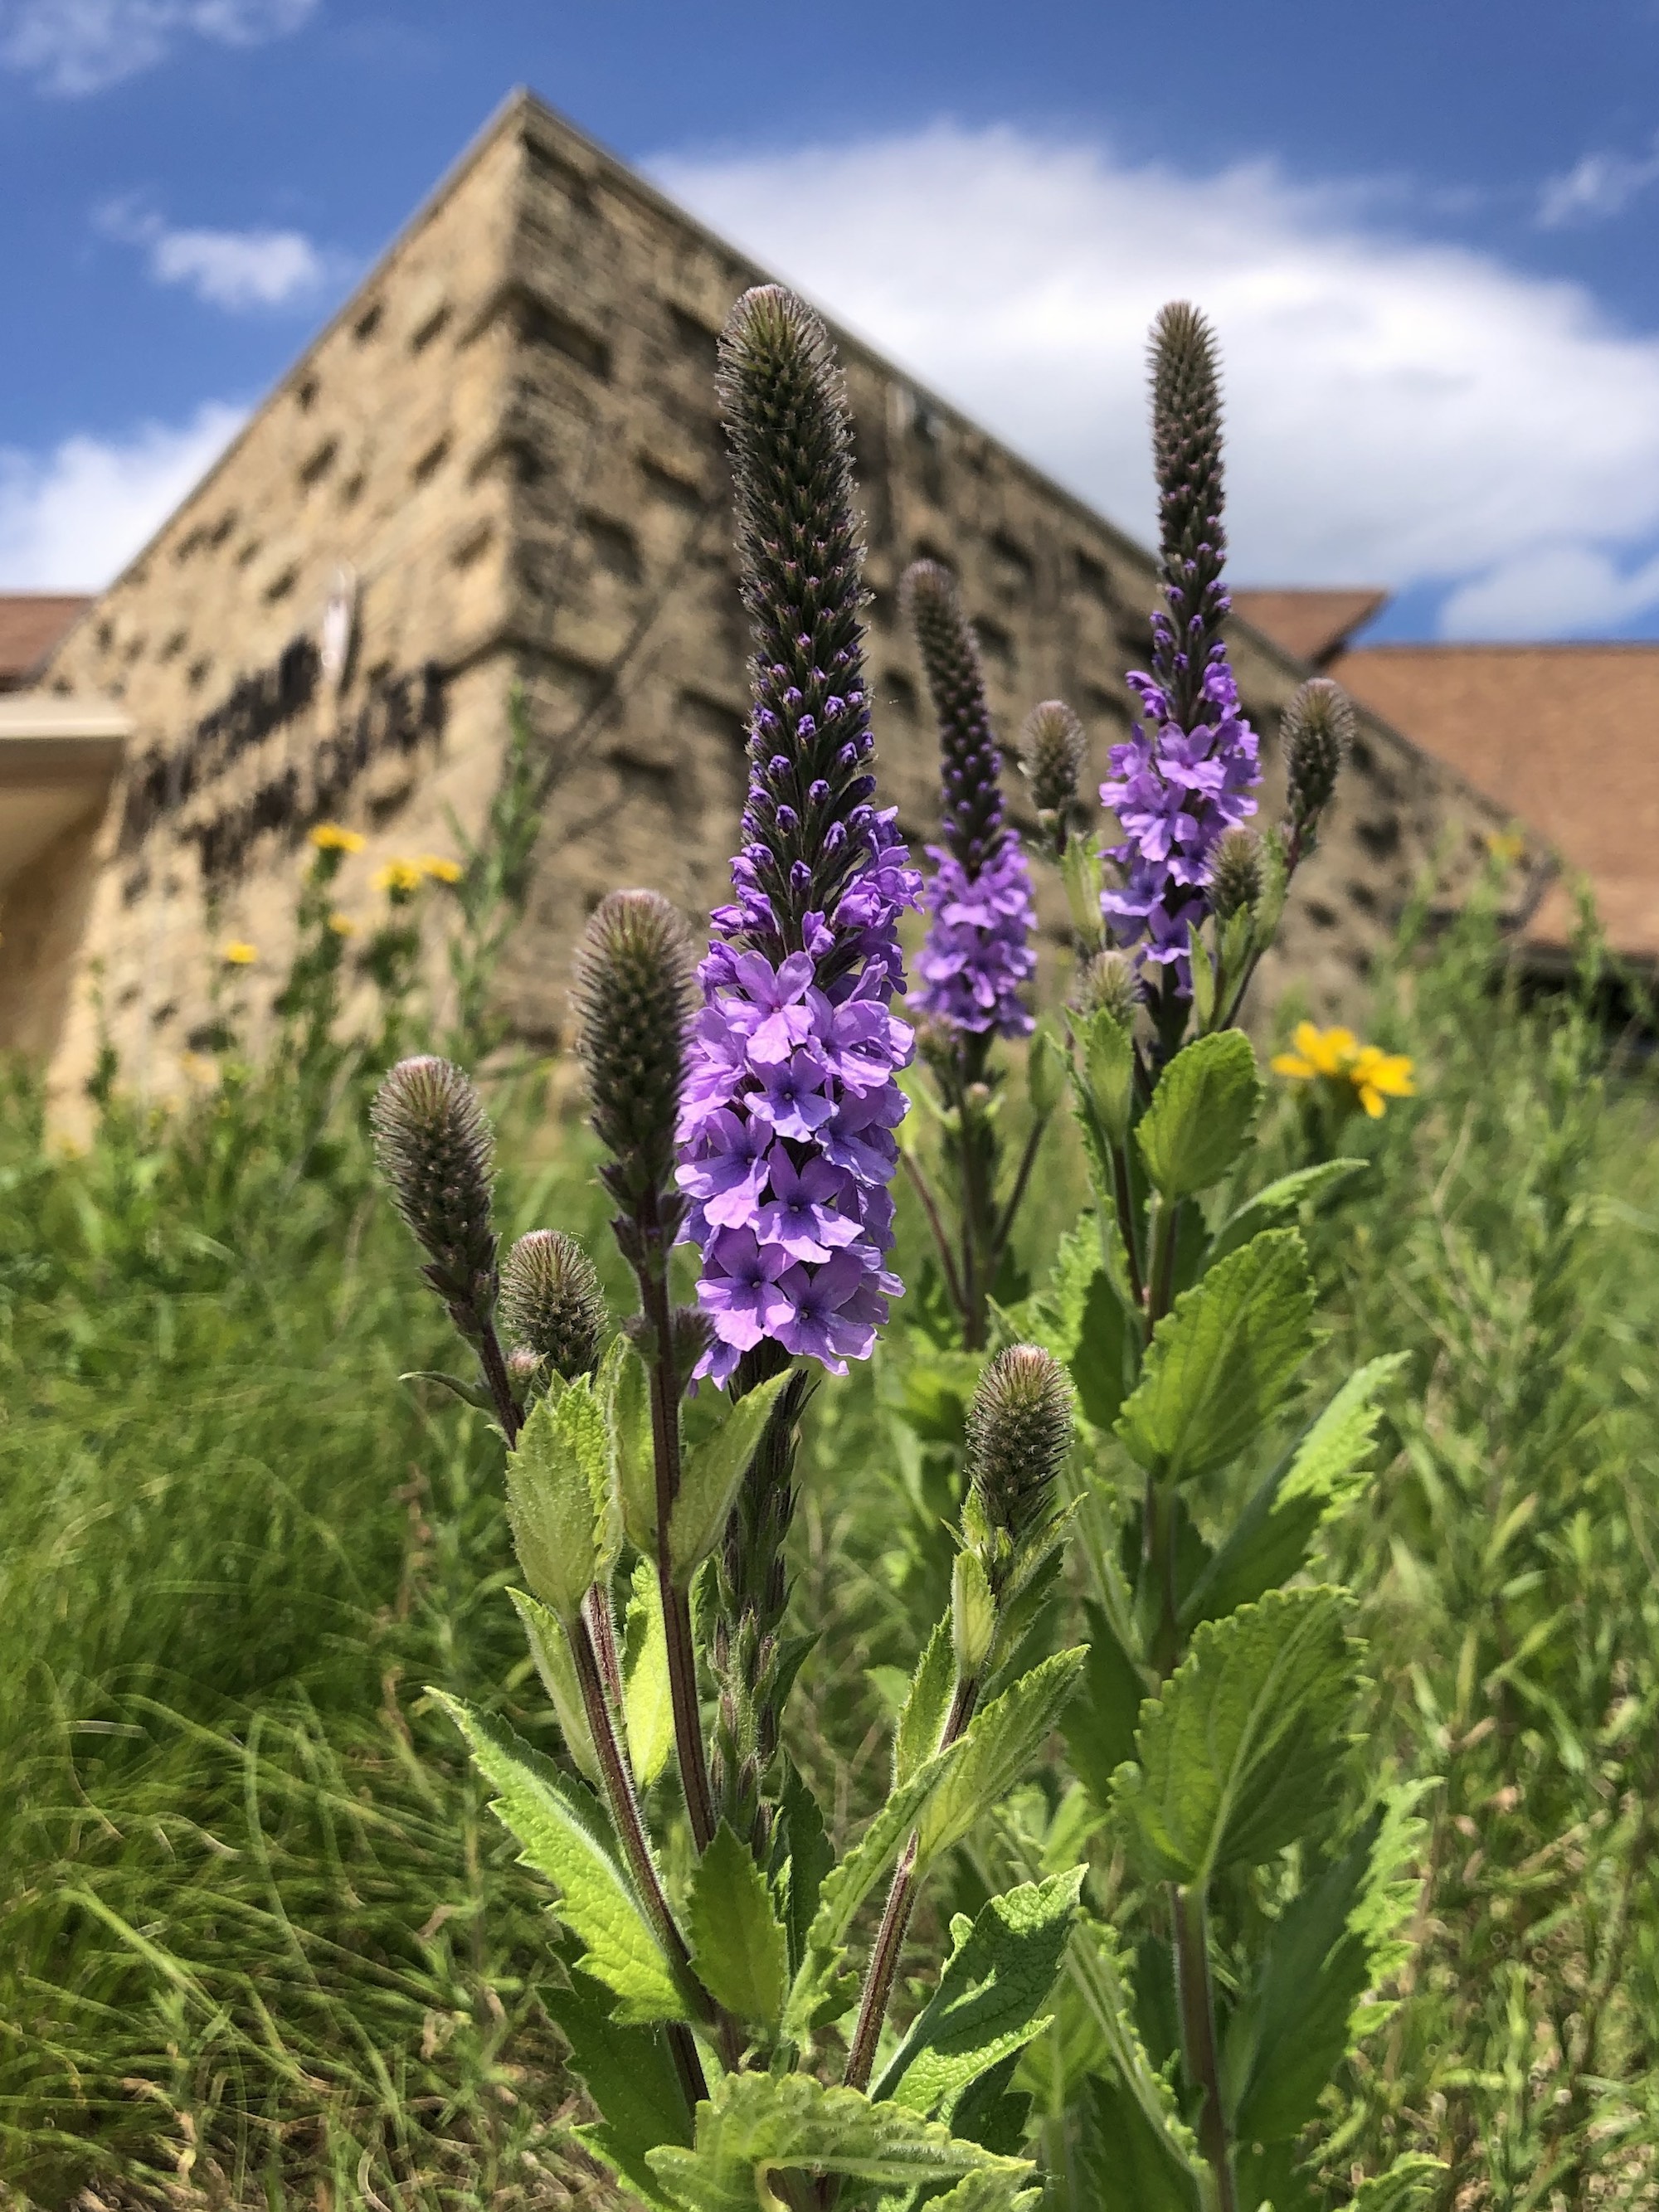 Hoary Vervain next to the UW Arboretum Visitors Center parking lot on June 22, 2021.